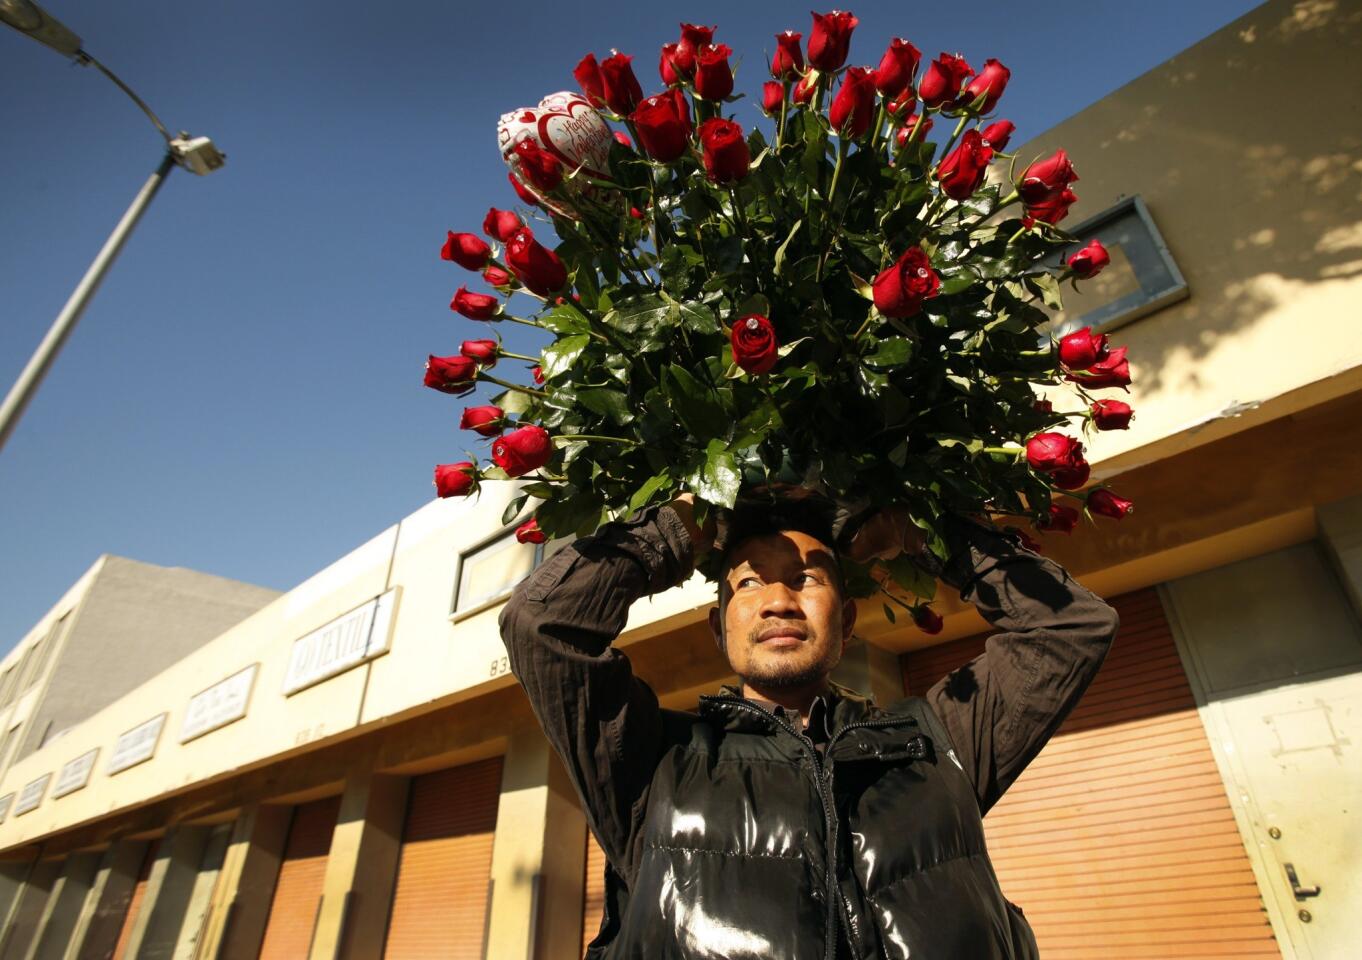 Chiv Mer holds a giant bouquet of roses on his head as he waits for his friend to open the back door of a van that will hold the flowers he has purchased for a secret admirer in the flower district of downtown Los Angeles on Valentine's Day.